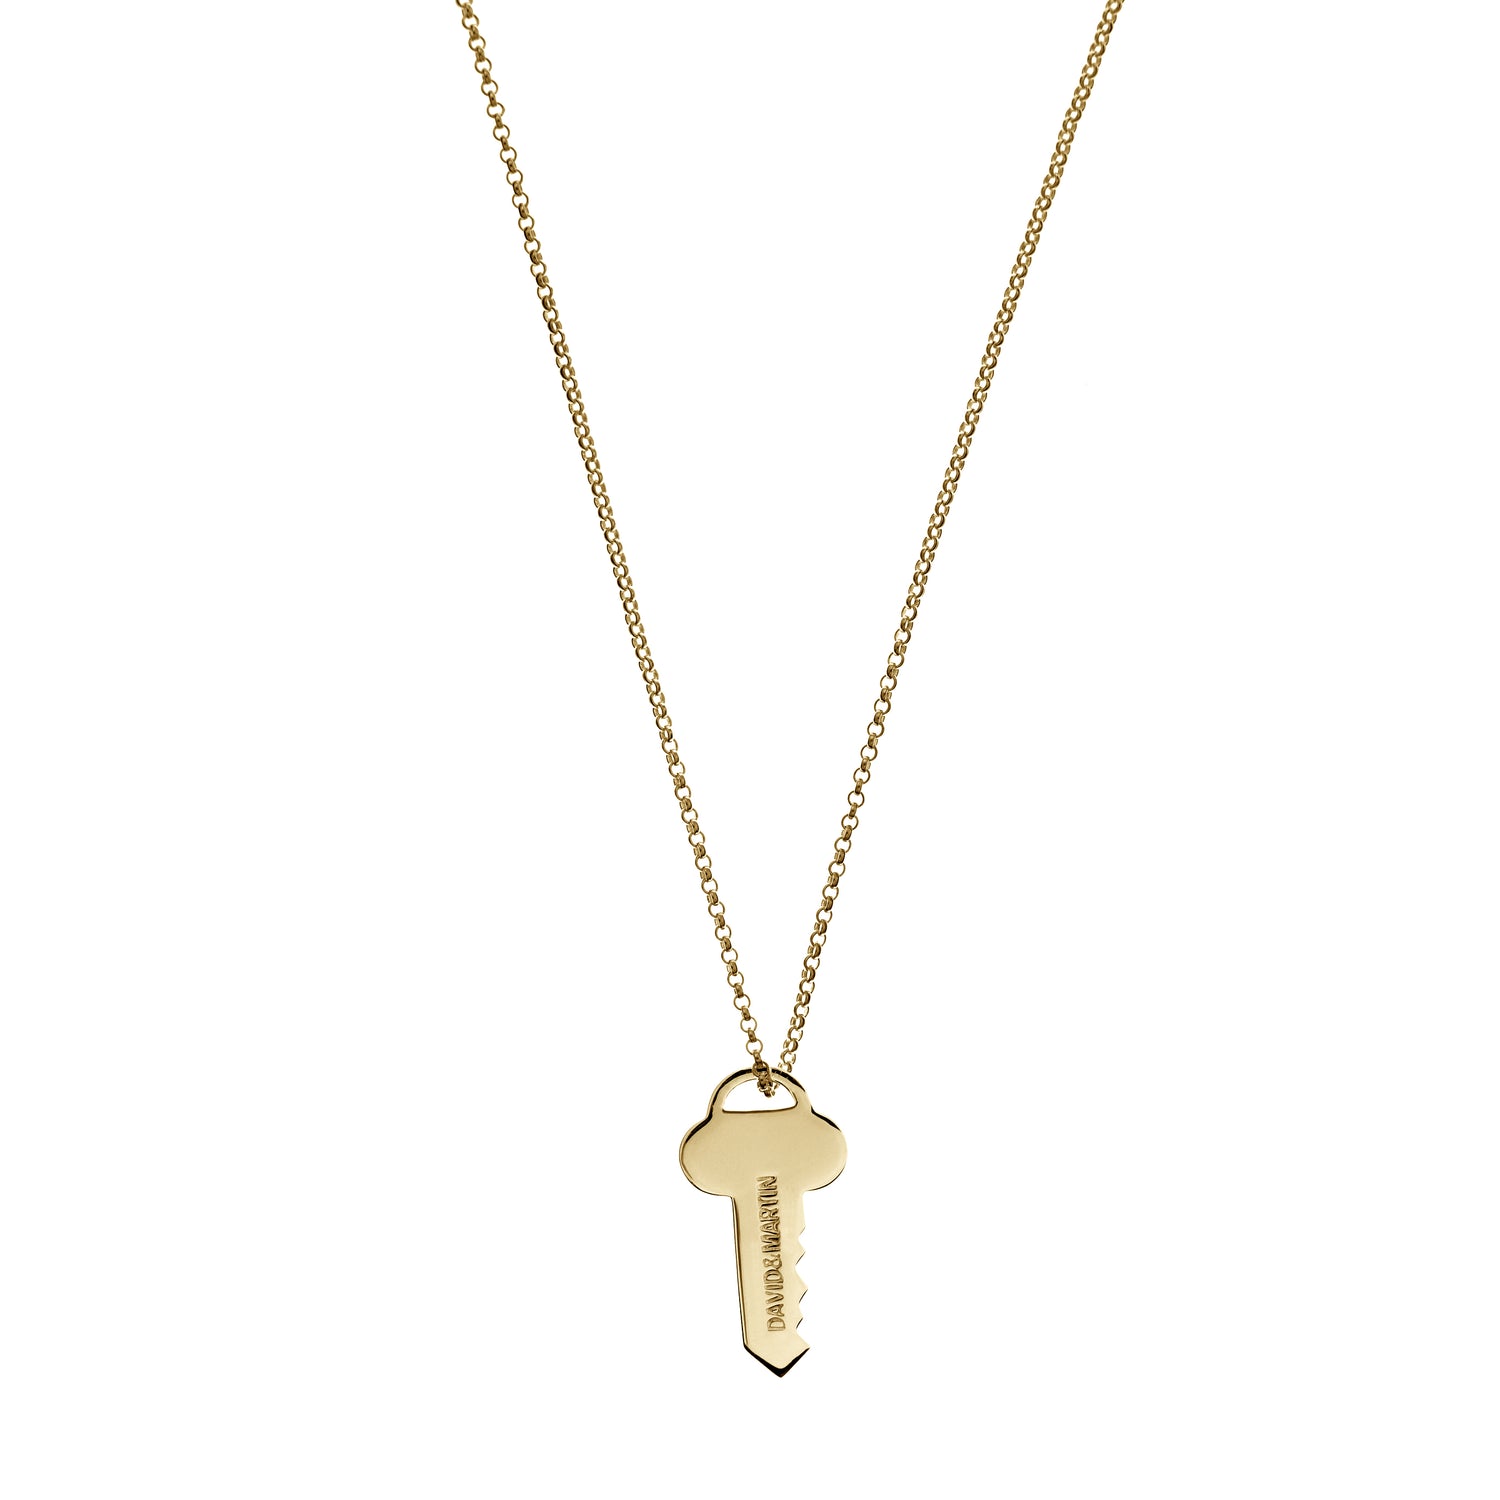 Minimalist unisex Key necklace.  Material: 18 karat gold-plated silver.  Size: the length is 45 cm.